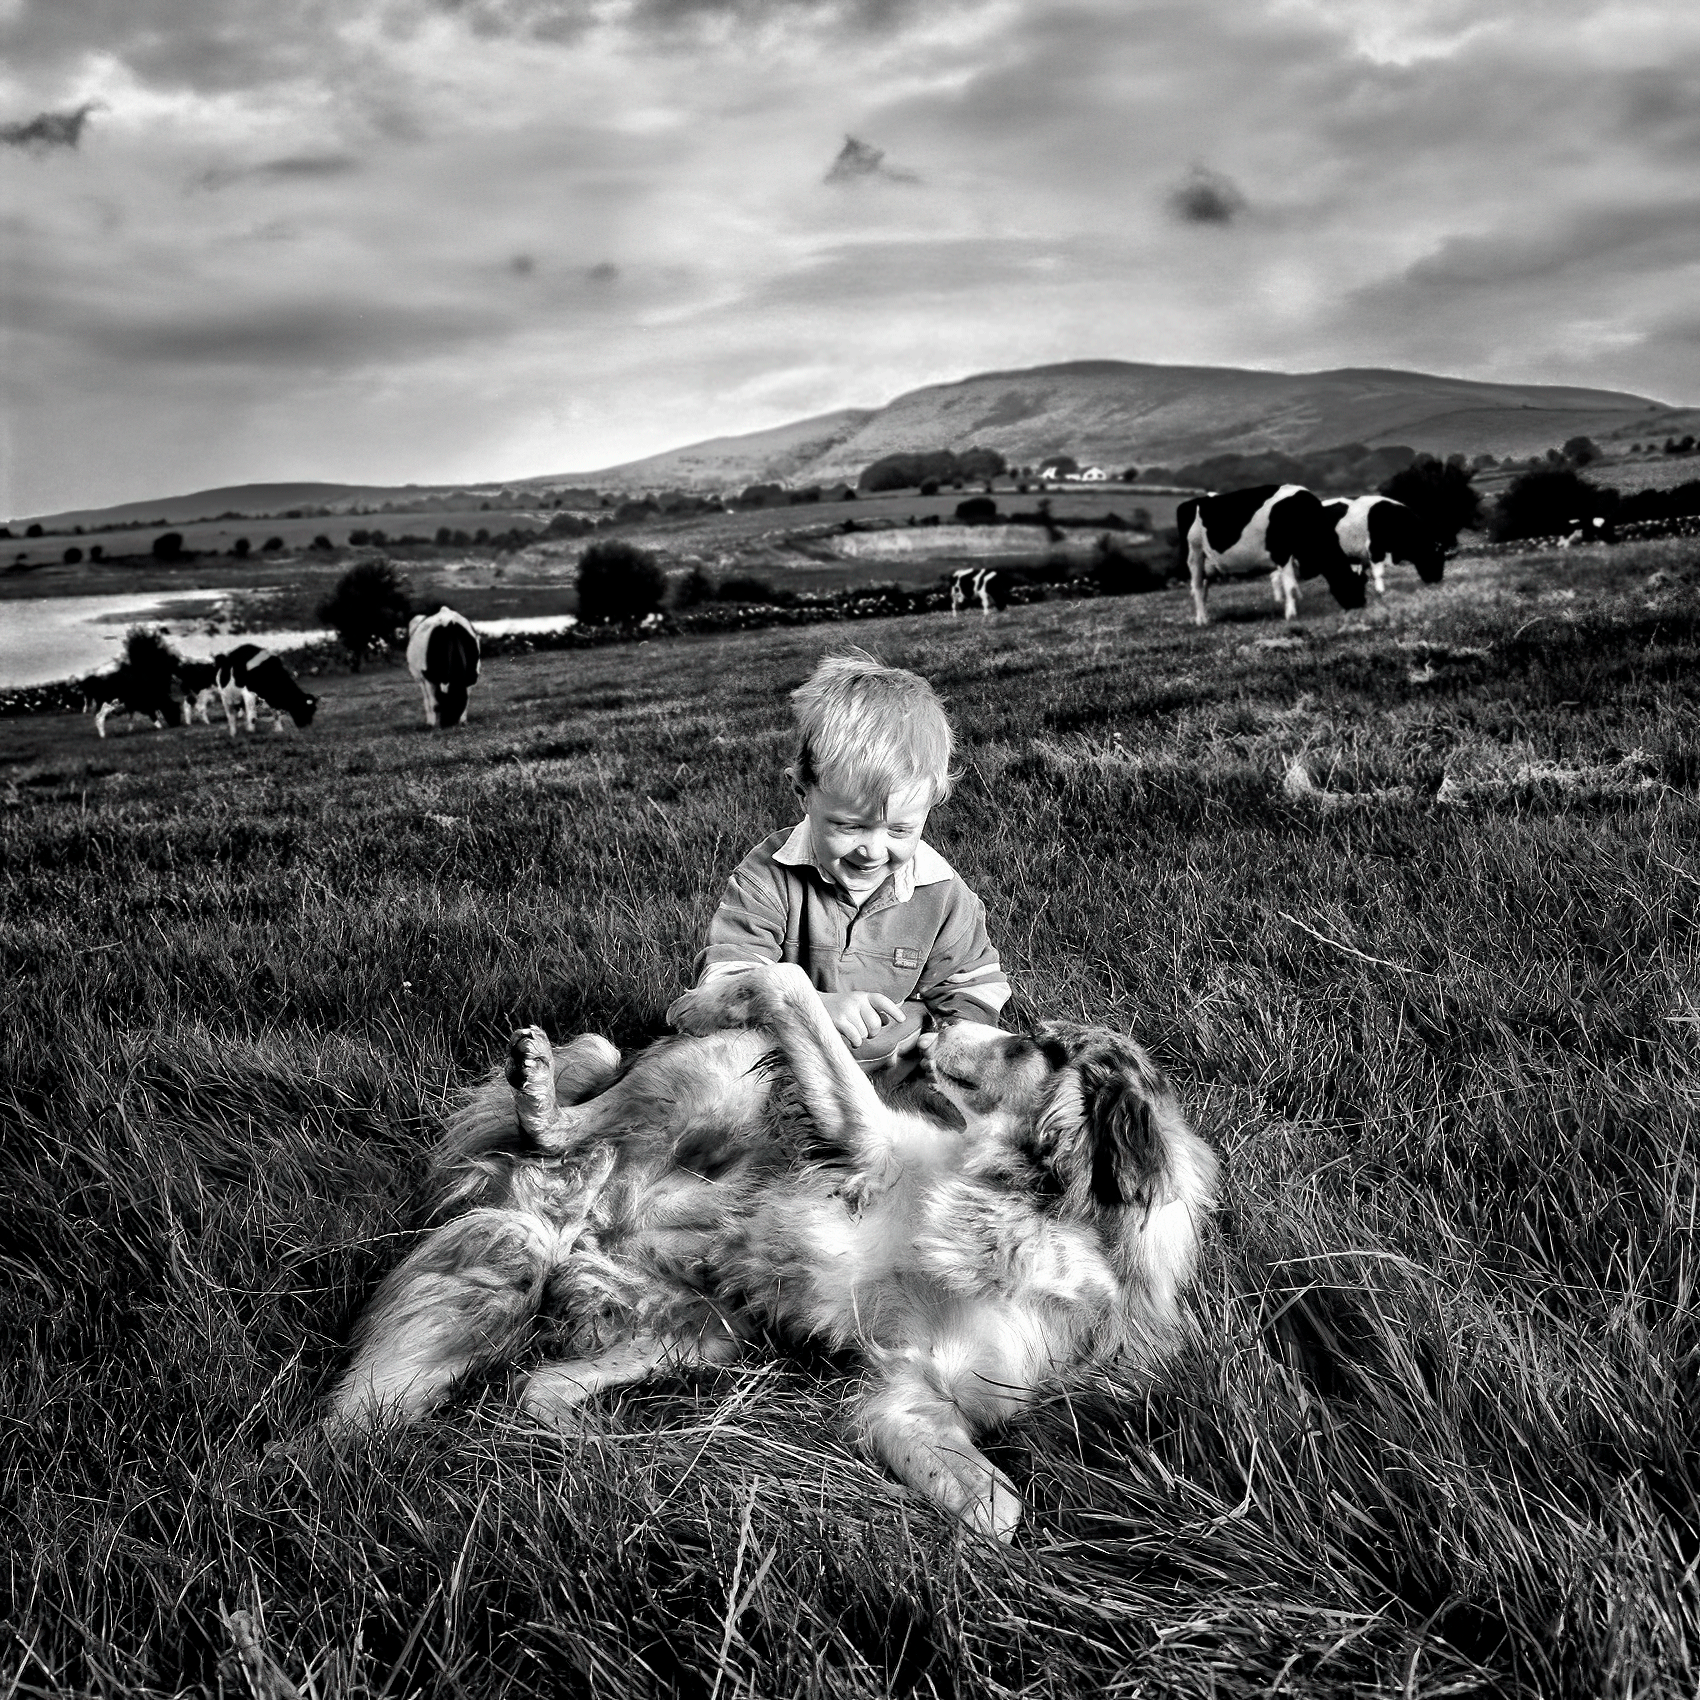 a-young-boy-plays-with-a-sheep-dog-on-his-farm-in-county-clare-ireland